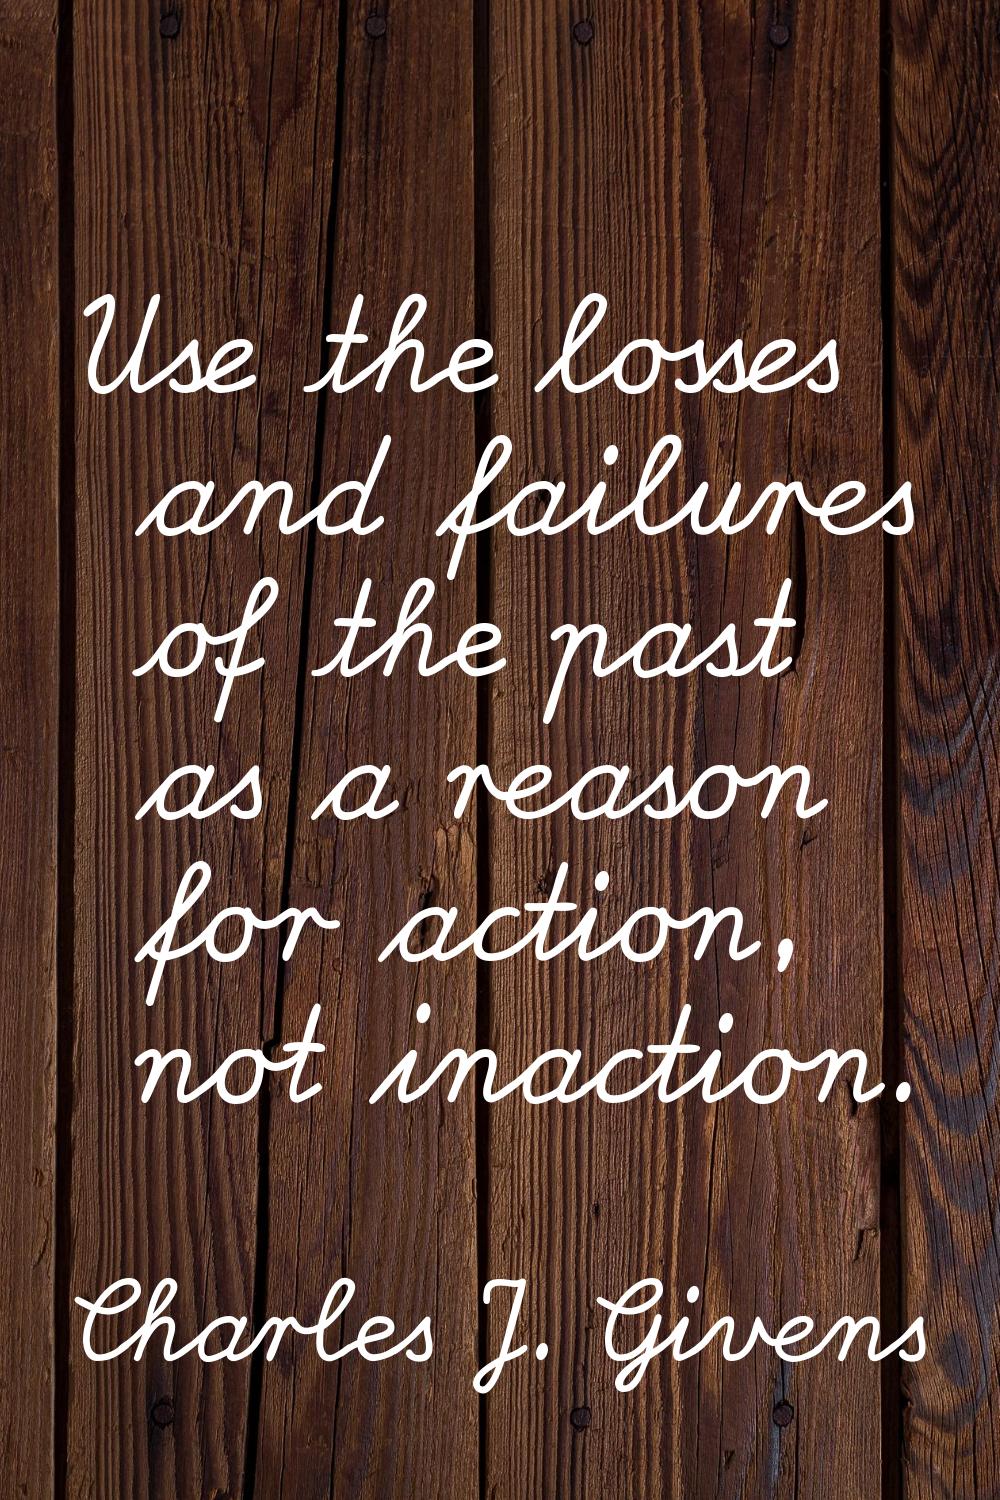 Use the losses and failures of the past as a reason for action, not inaction.